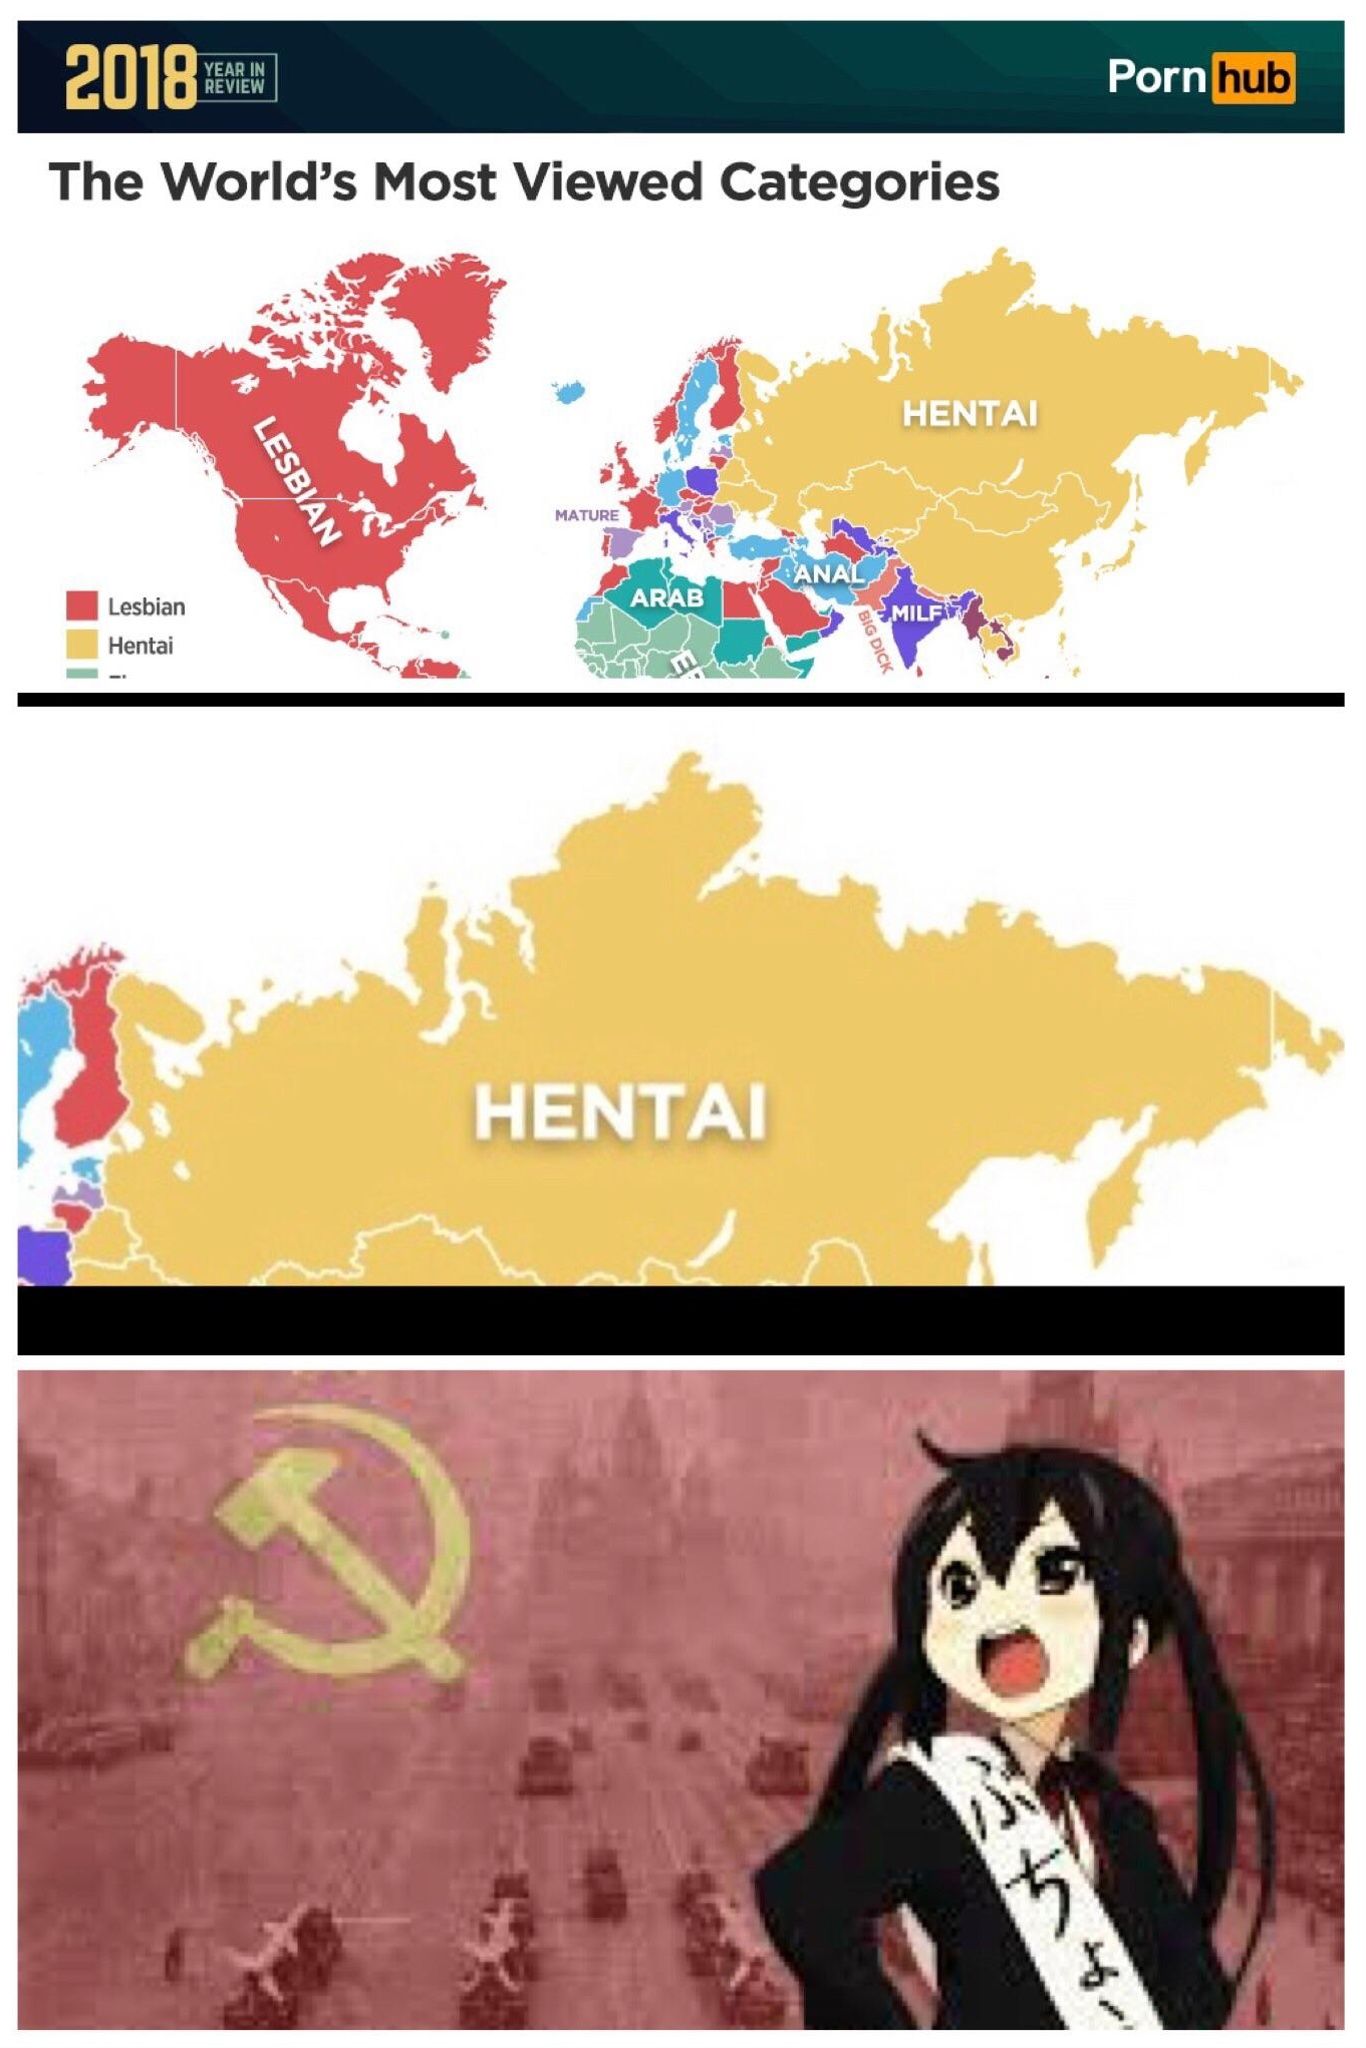 It is not your hentai, it is my hentai